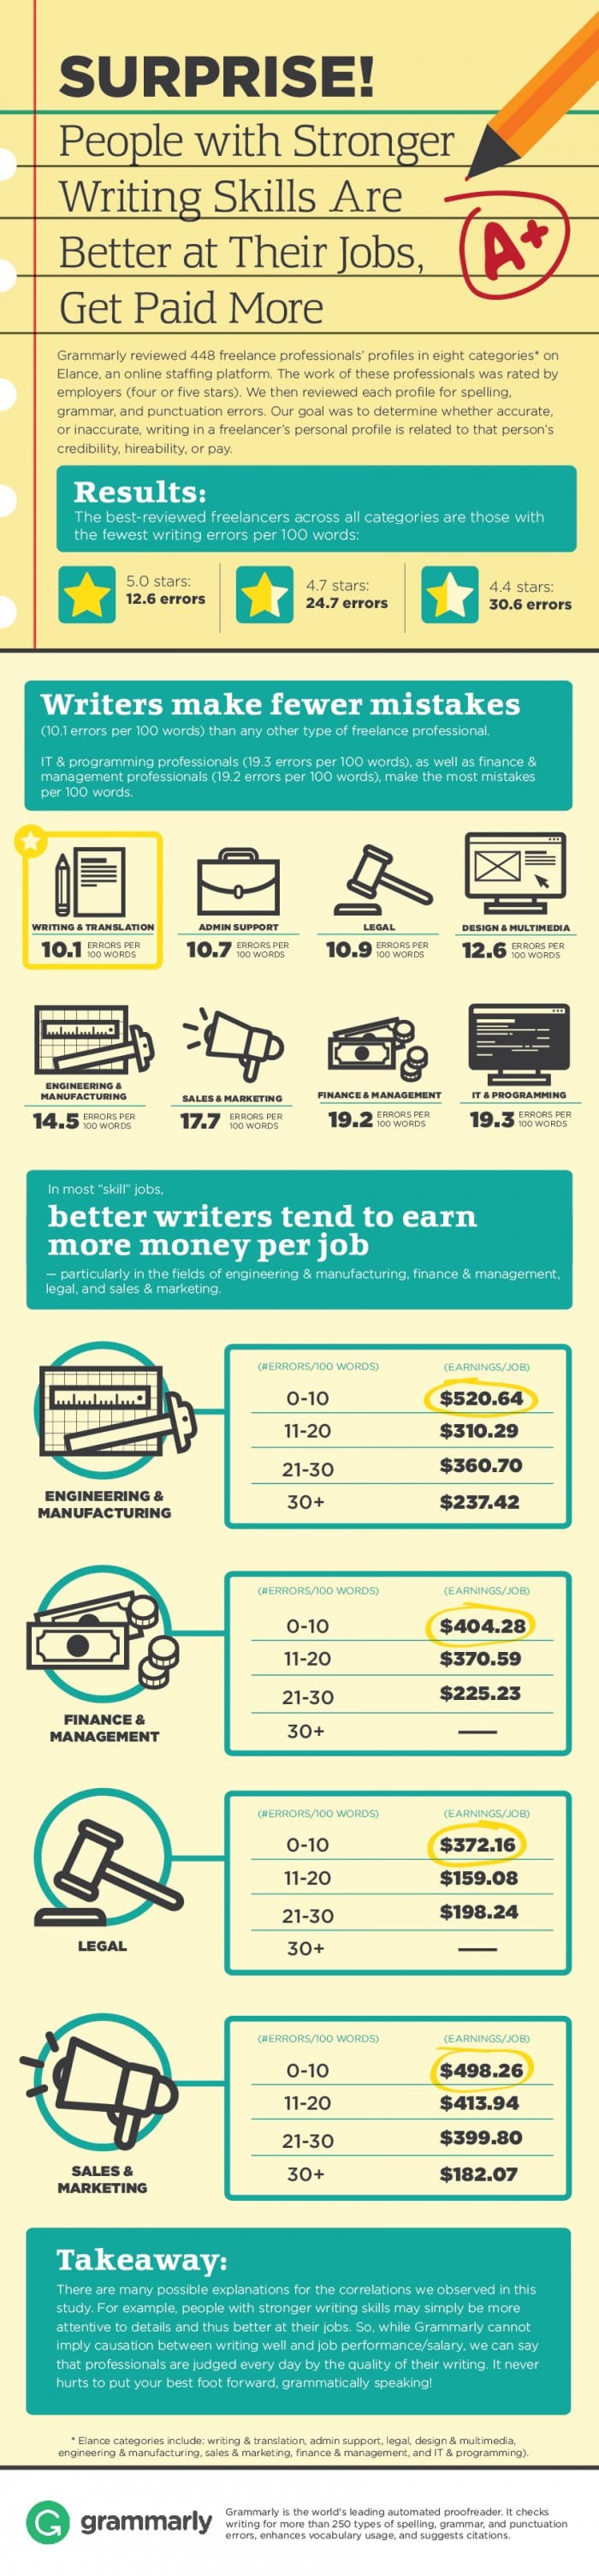 writing mistakes infographic